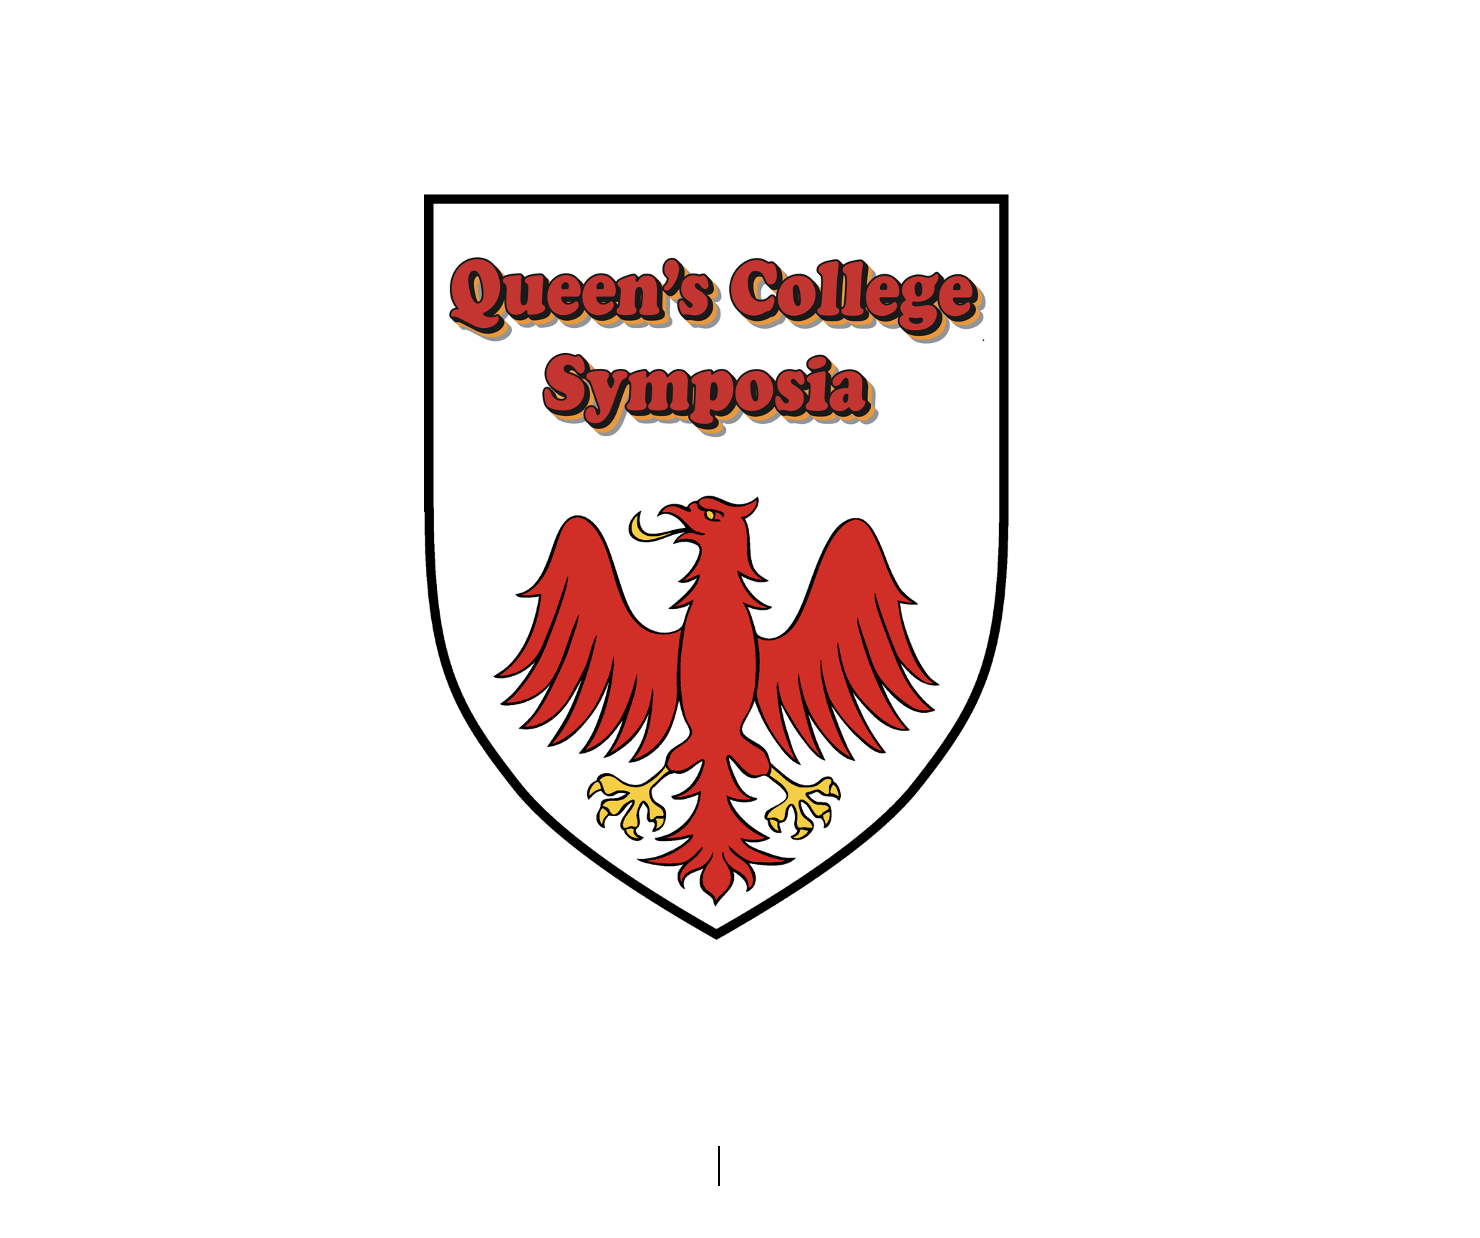 QCS logo with red eagle underneath text that says 'Queen's College Symposia'